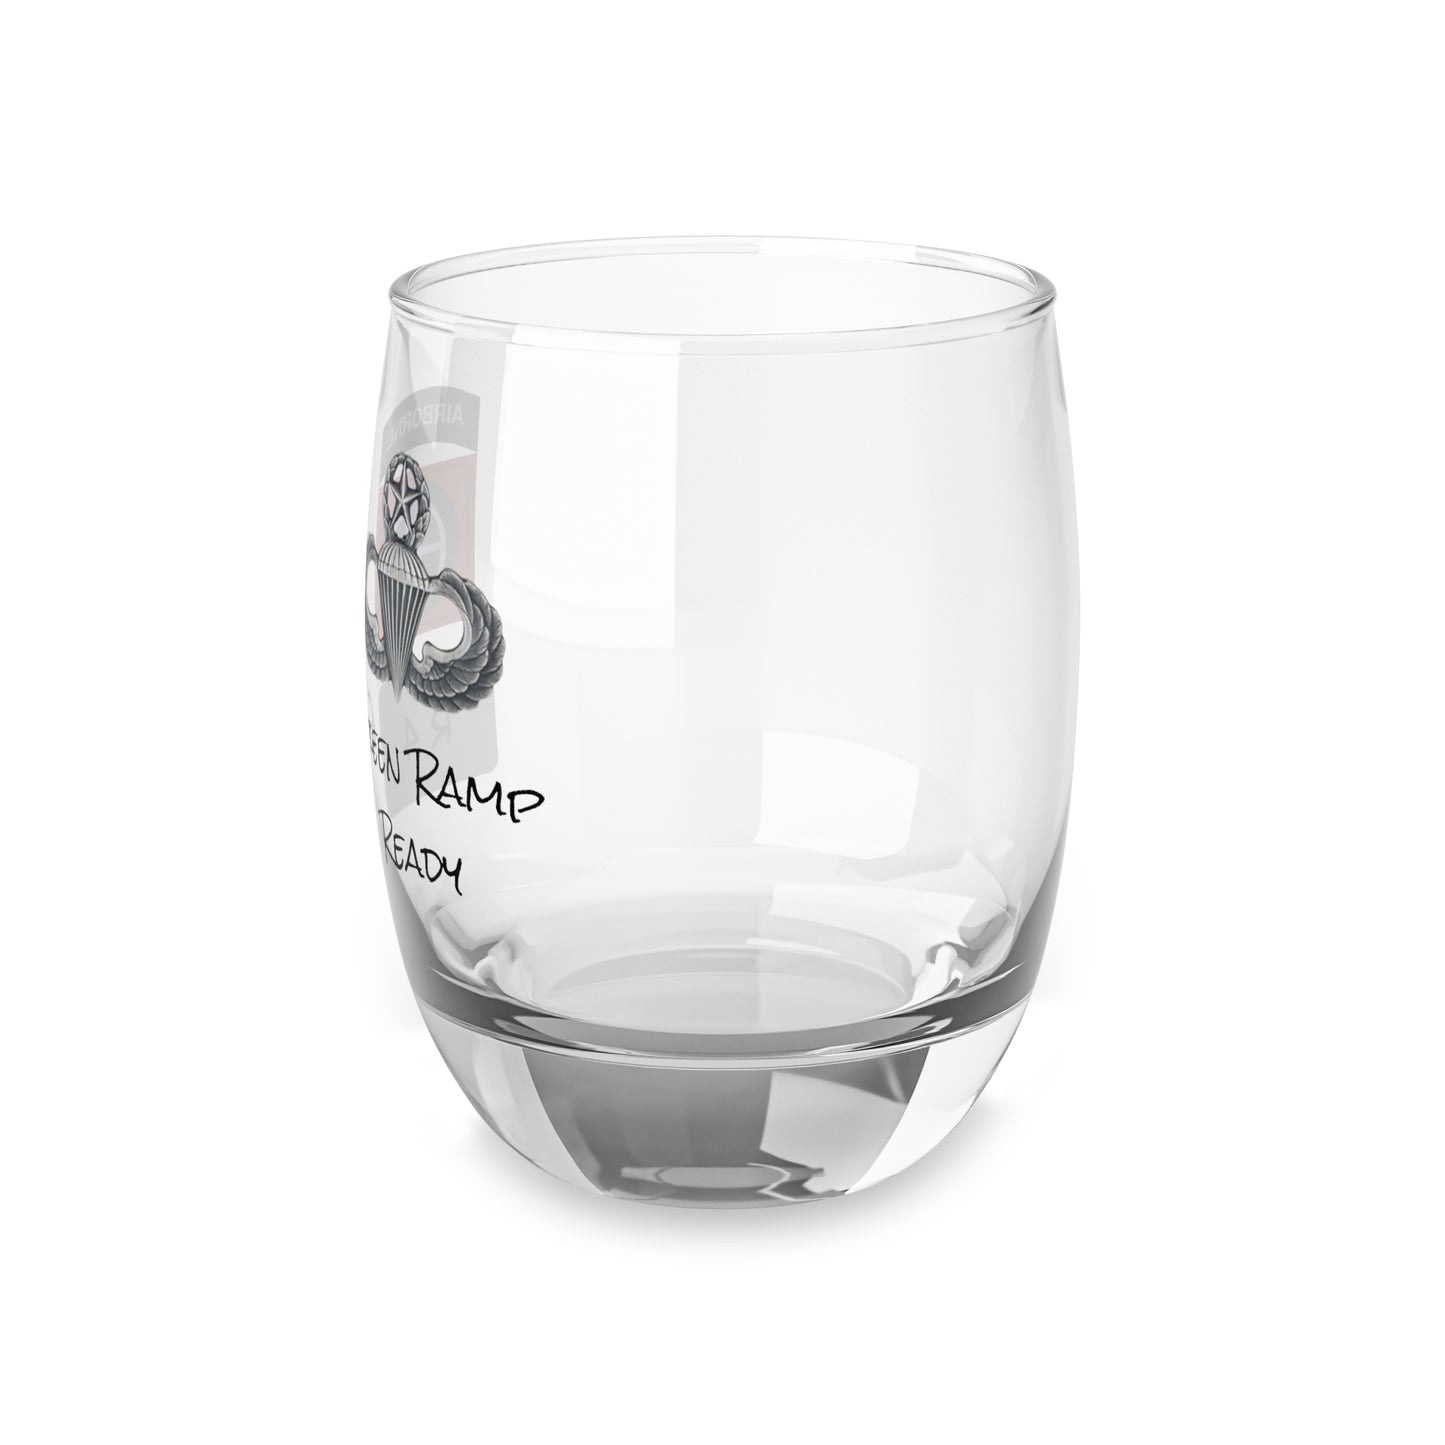 Green Ramp Ready Master Wing Whiskey Glass Jumper R4